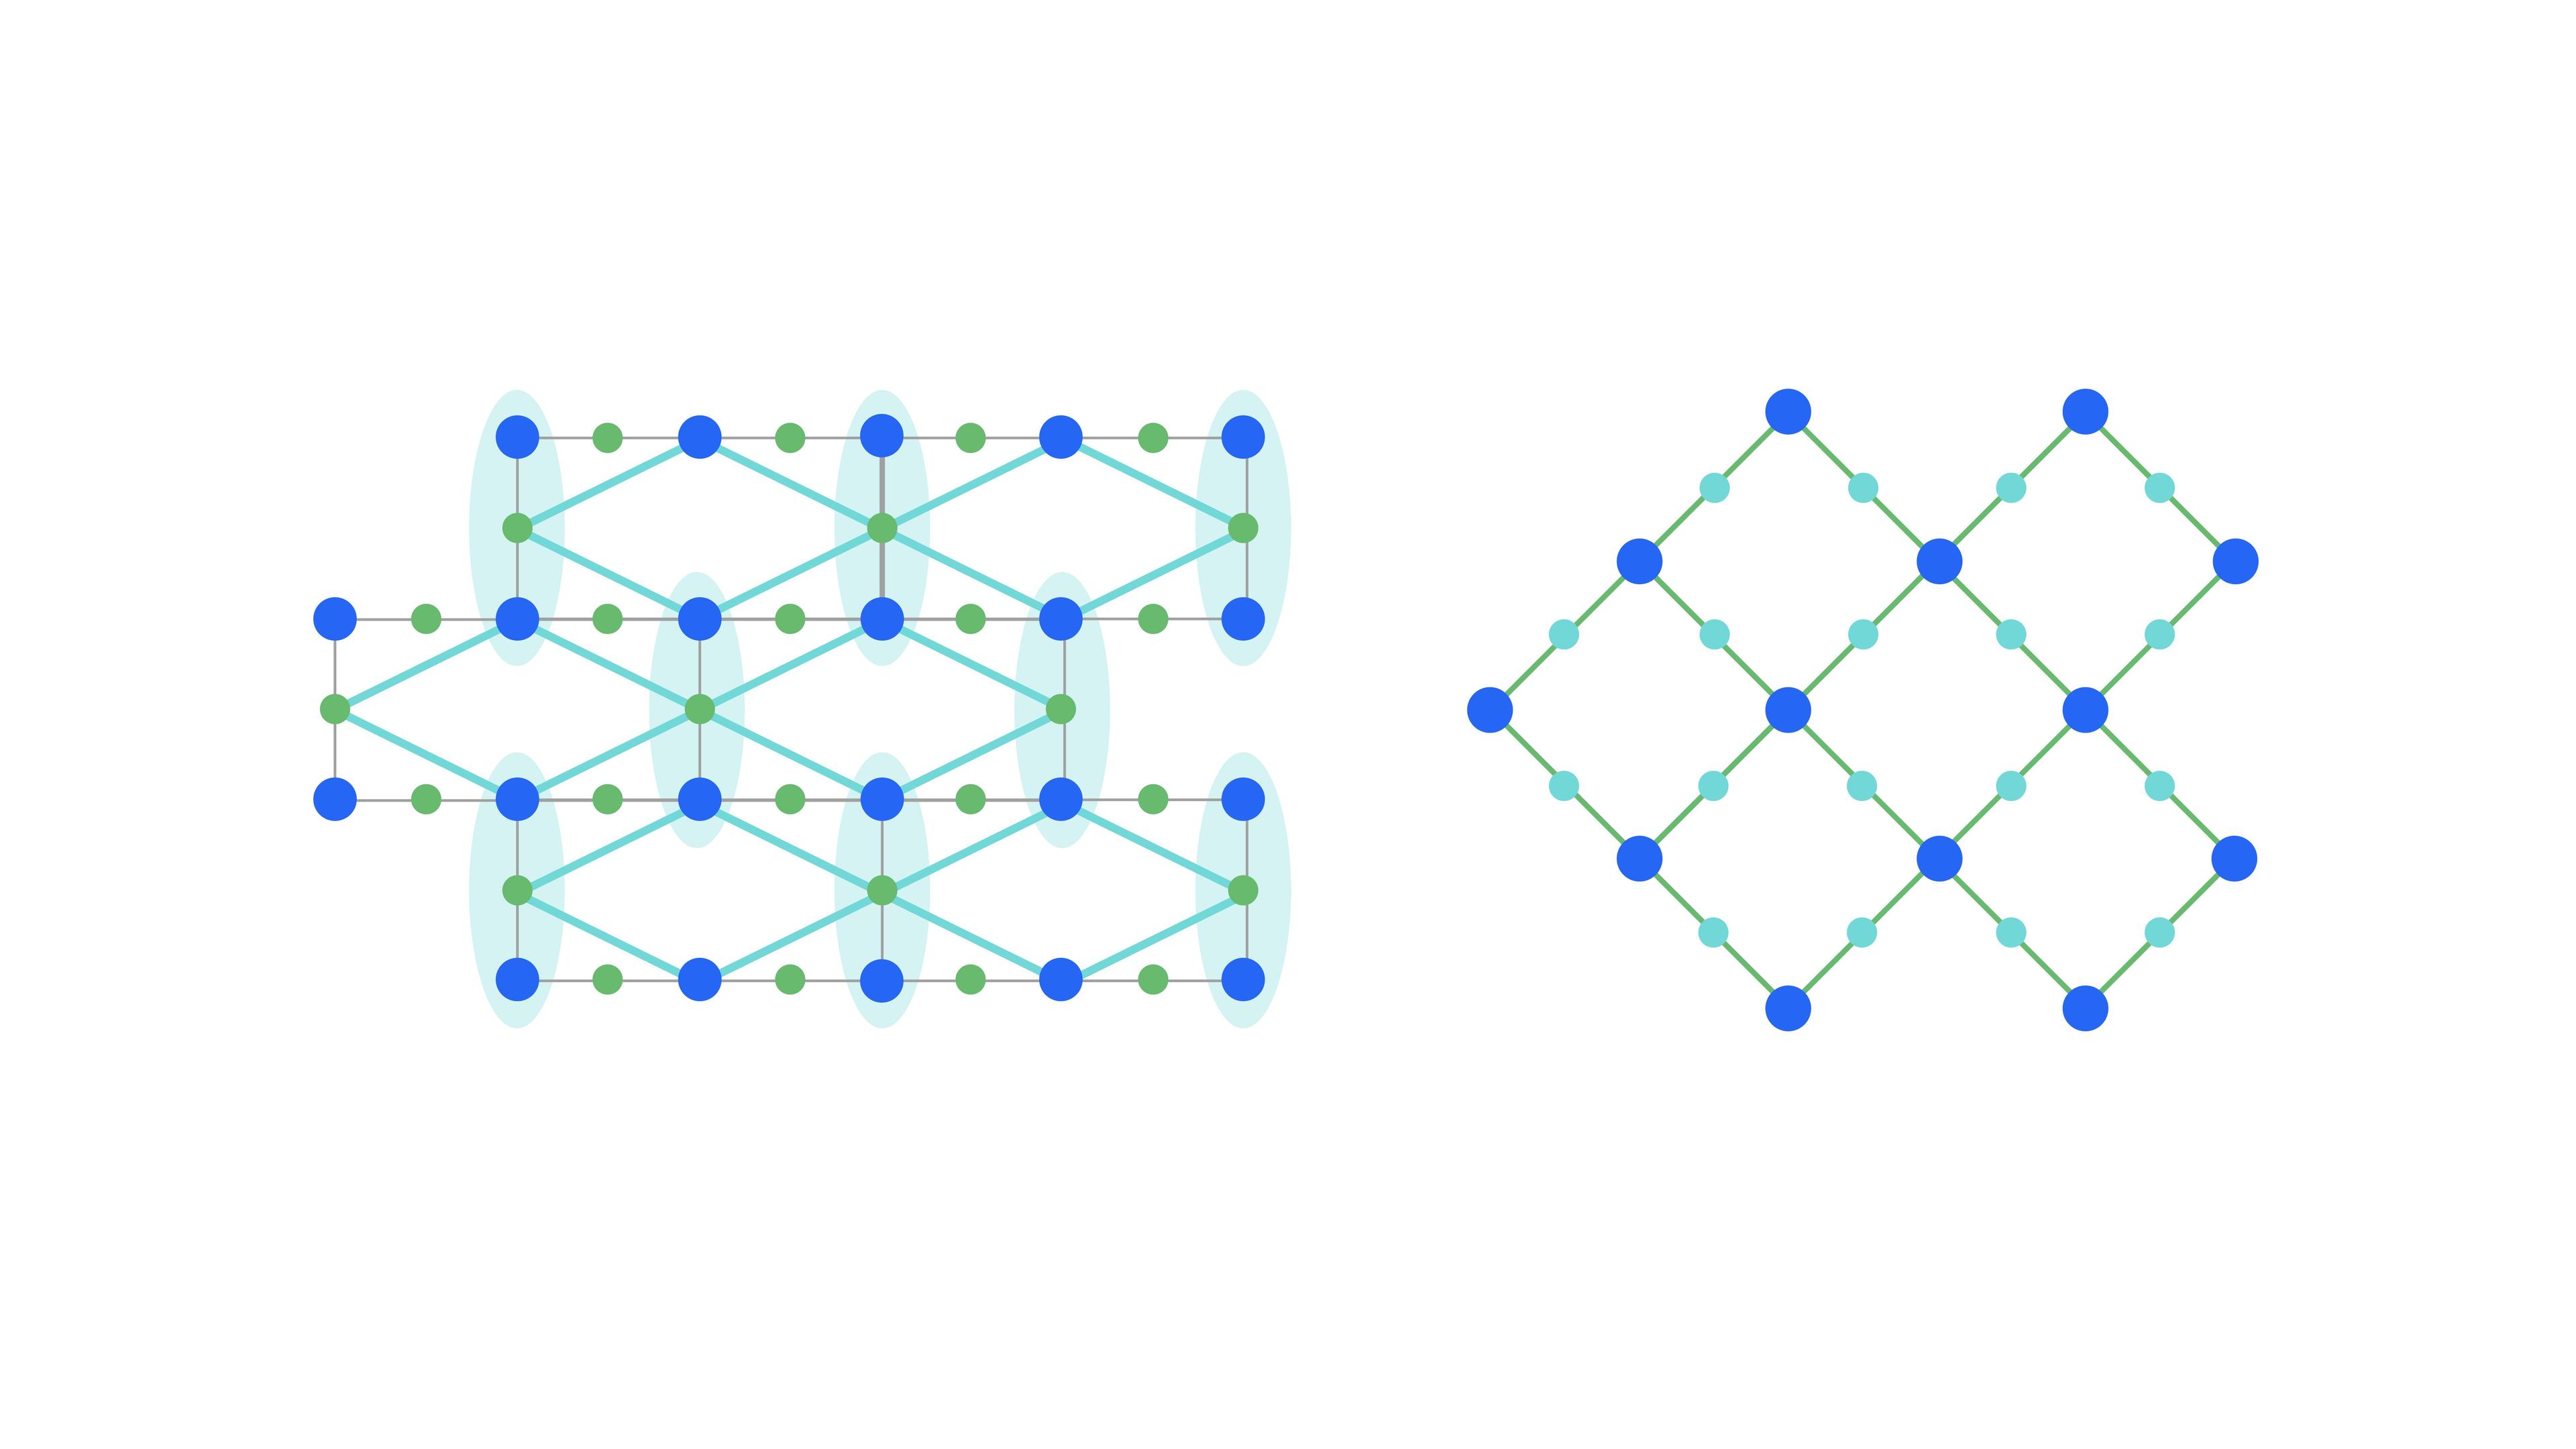 Encoding into the 3-qubits repetition code (left) leads to a logical heavy square lattice (right).